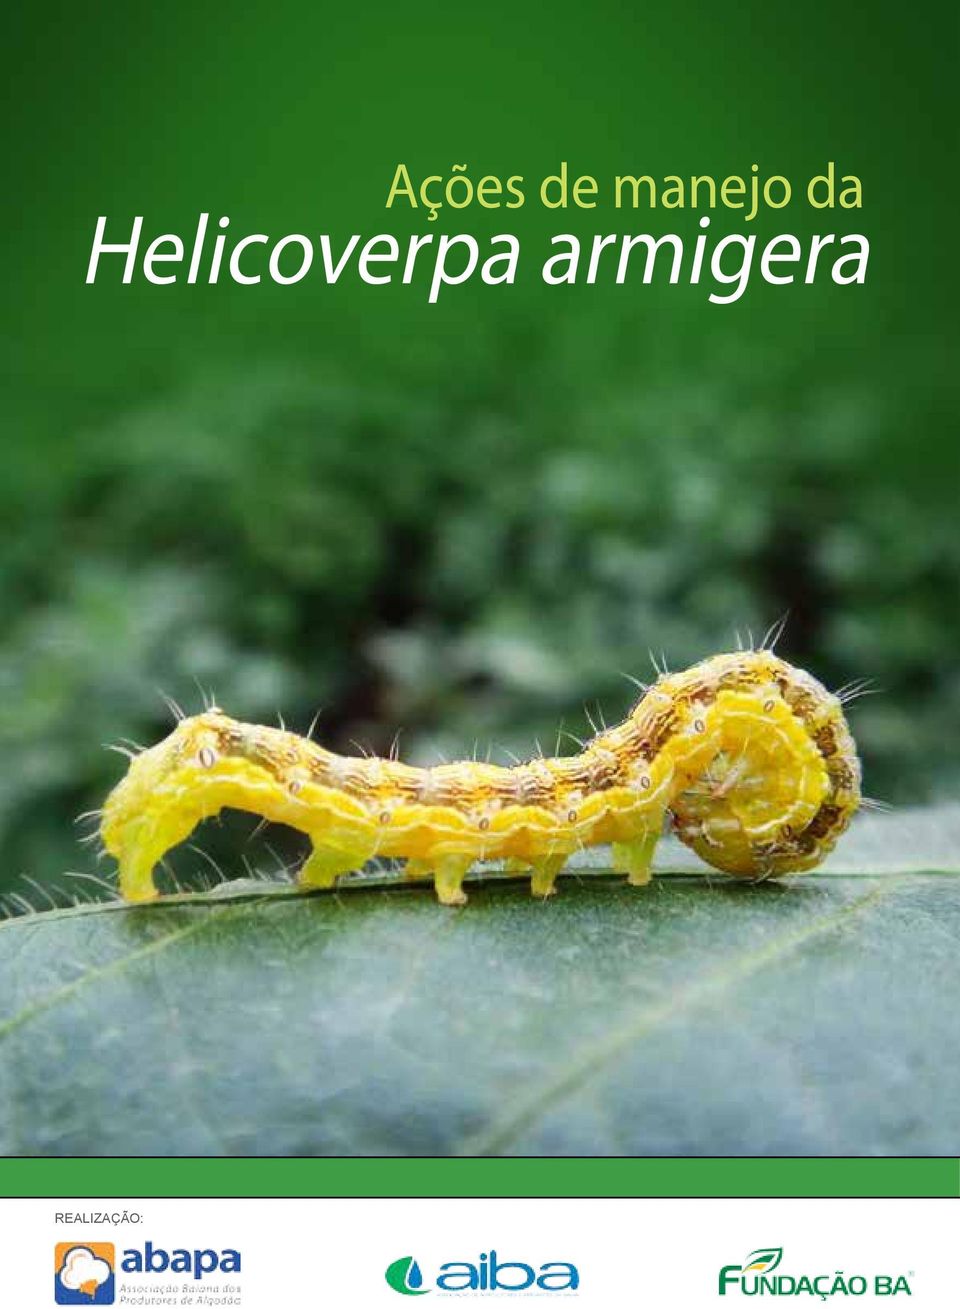 Helicoverpa